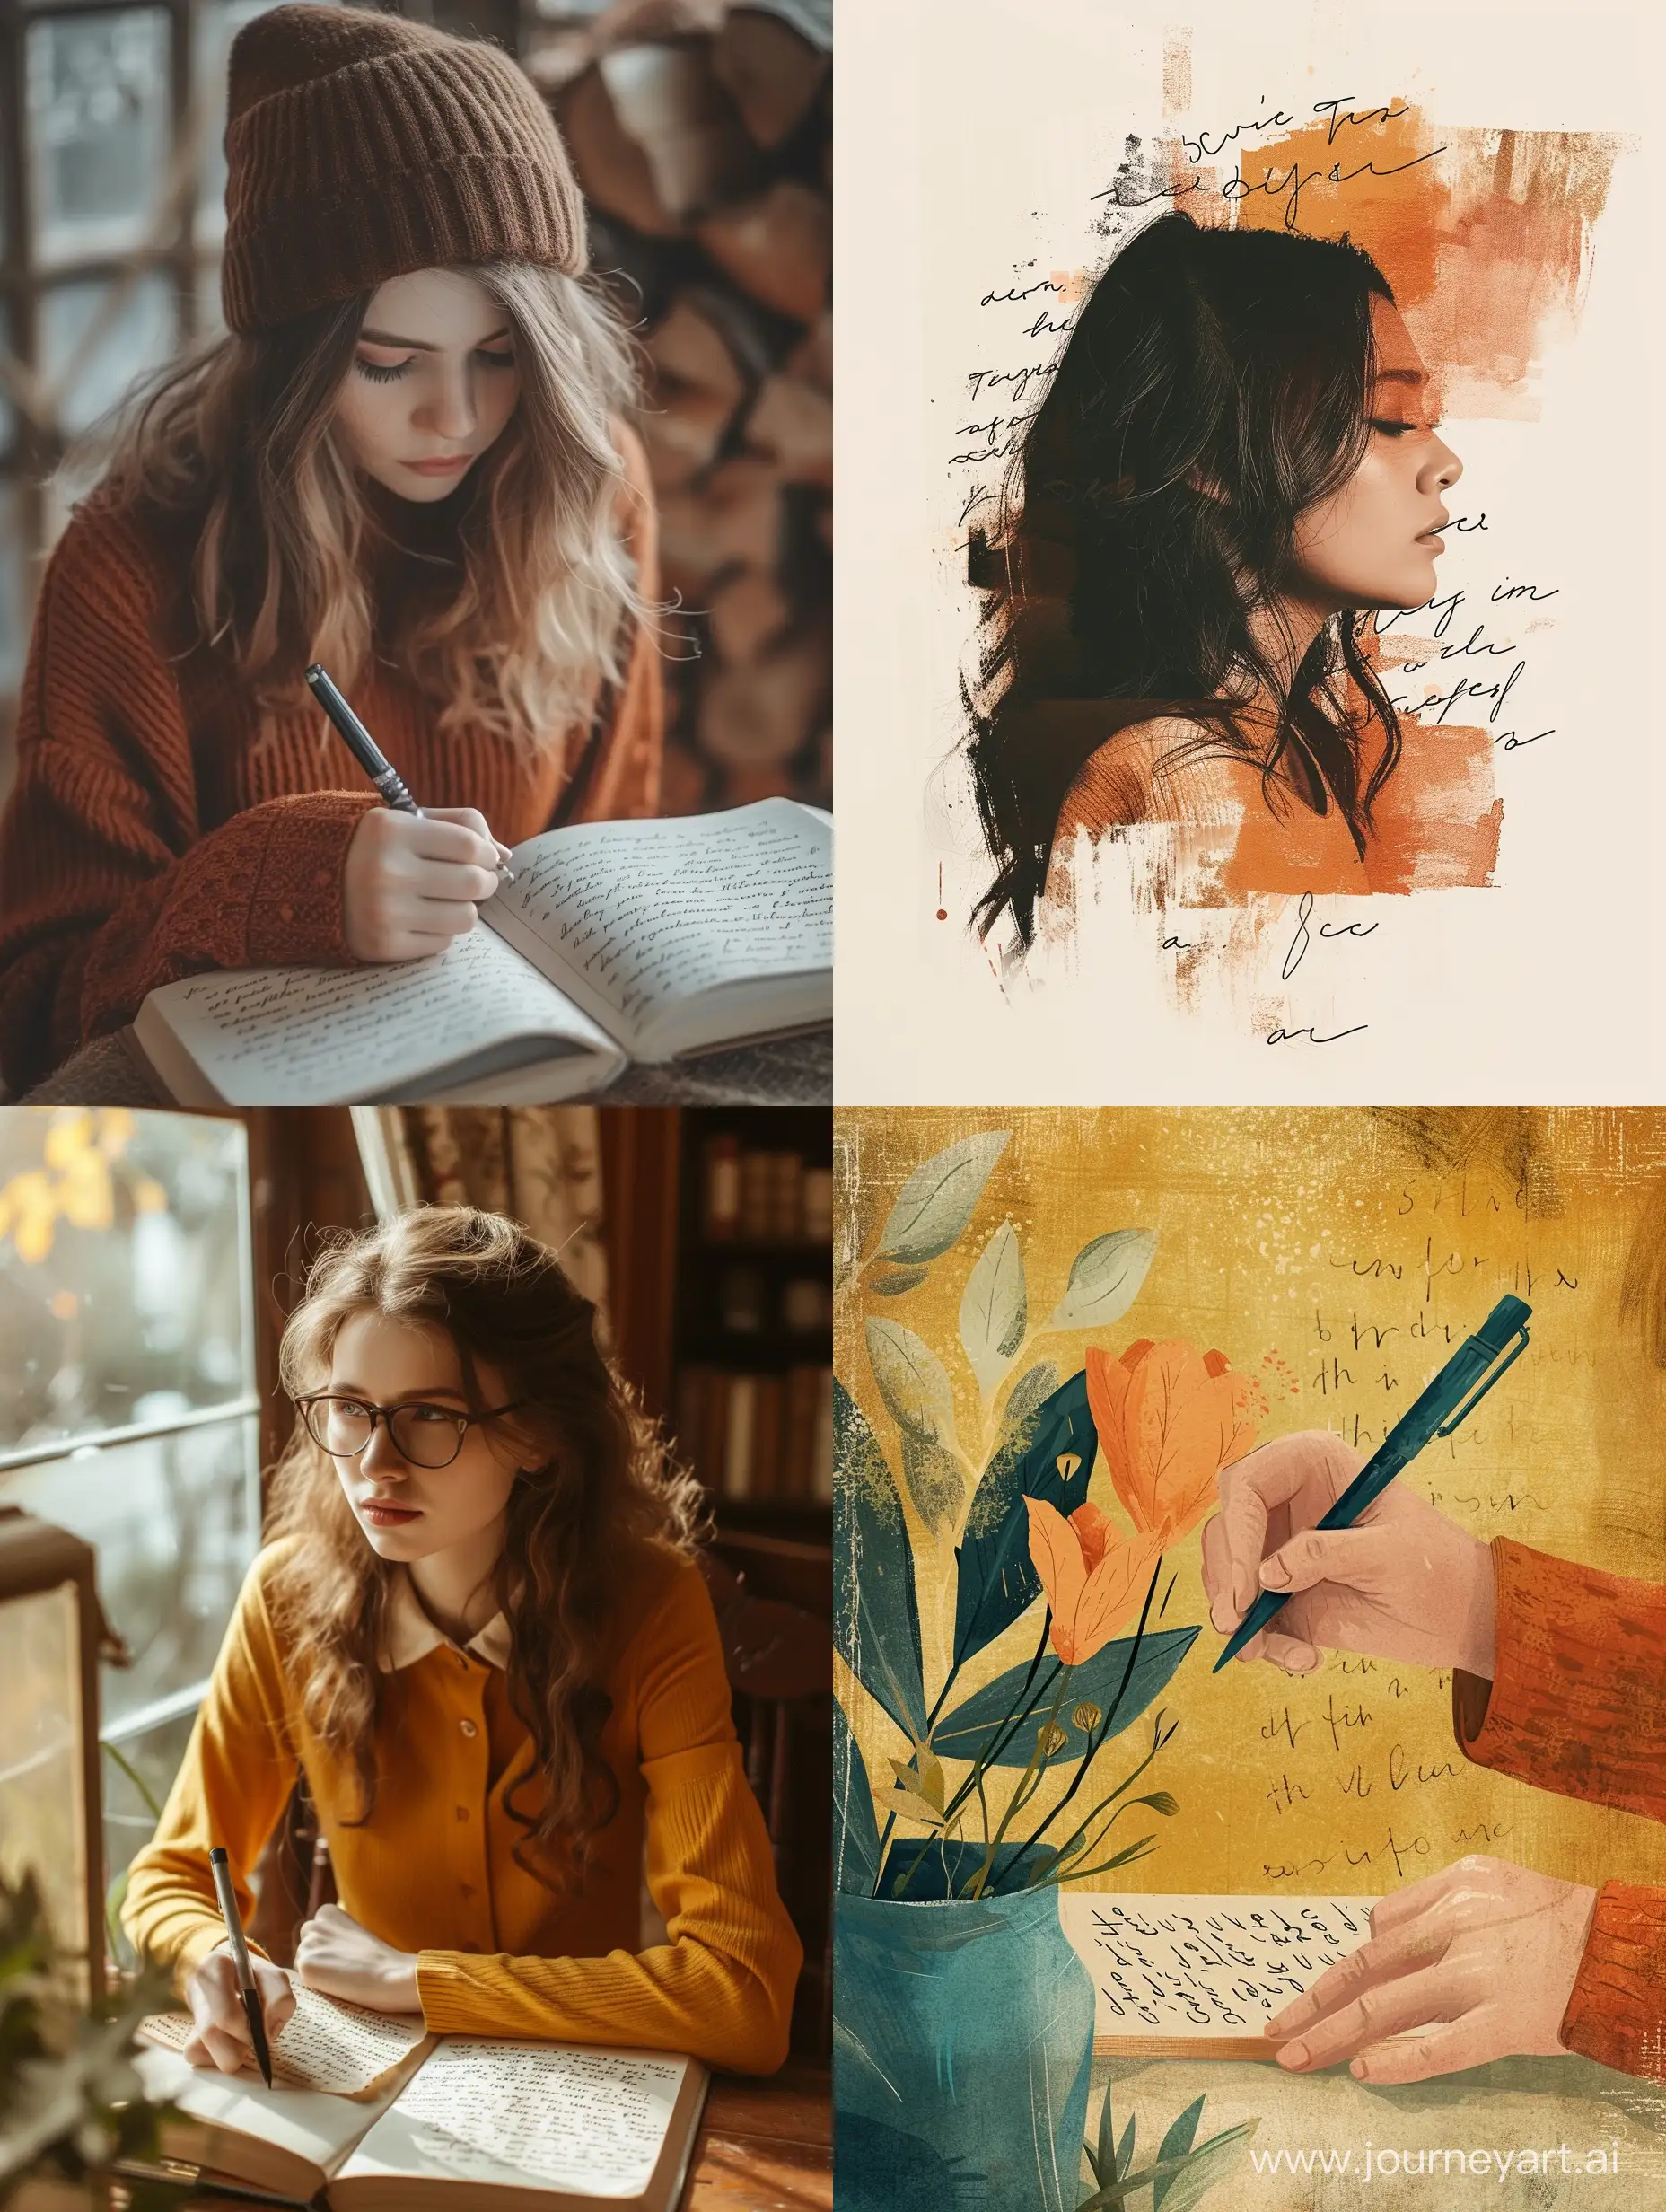 Design a profile picture that incorporates elements of handwritten letters or words, capturing the essence of personalized storytelling. Consider using warm colors and a clean, engaging layout. Make it inviting and reflective of the unique concept of writing each follower's name.